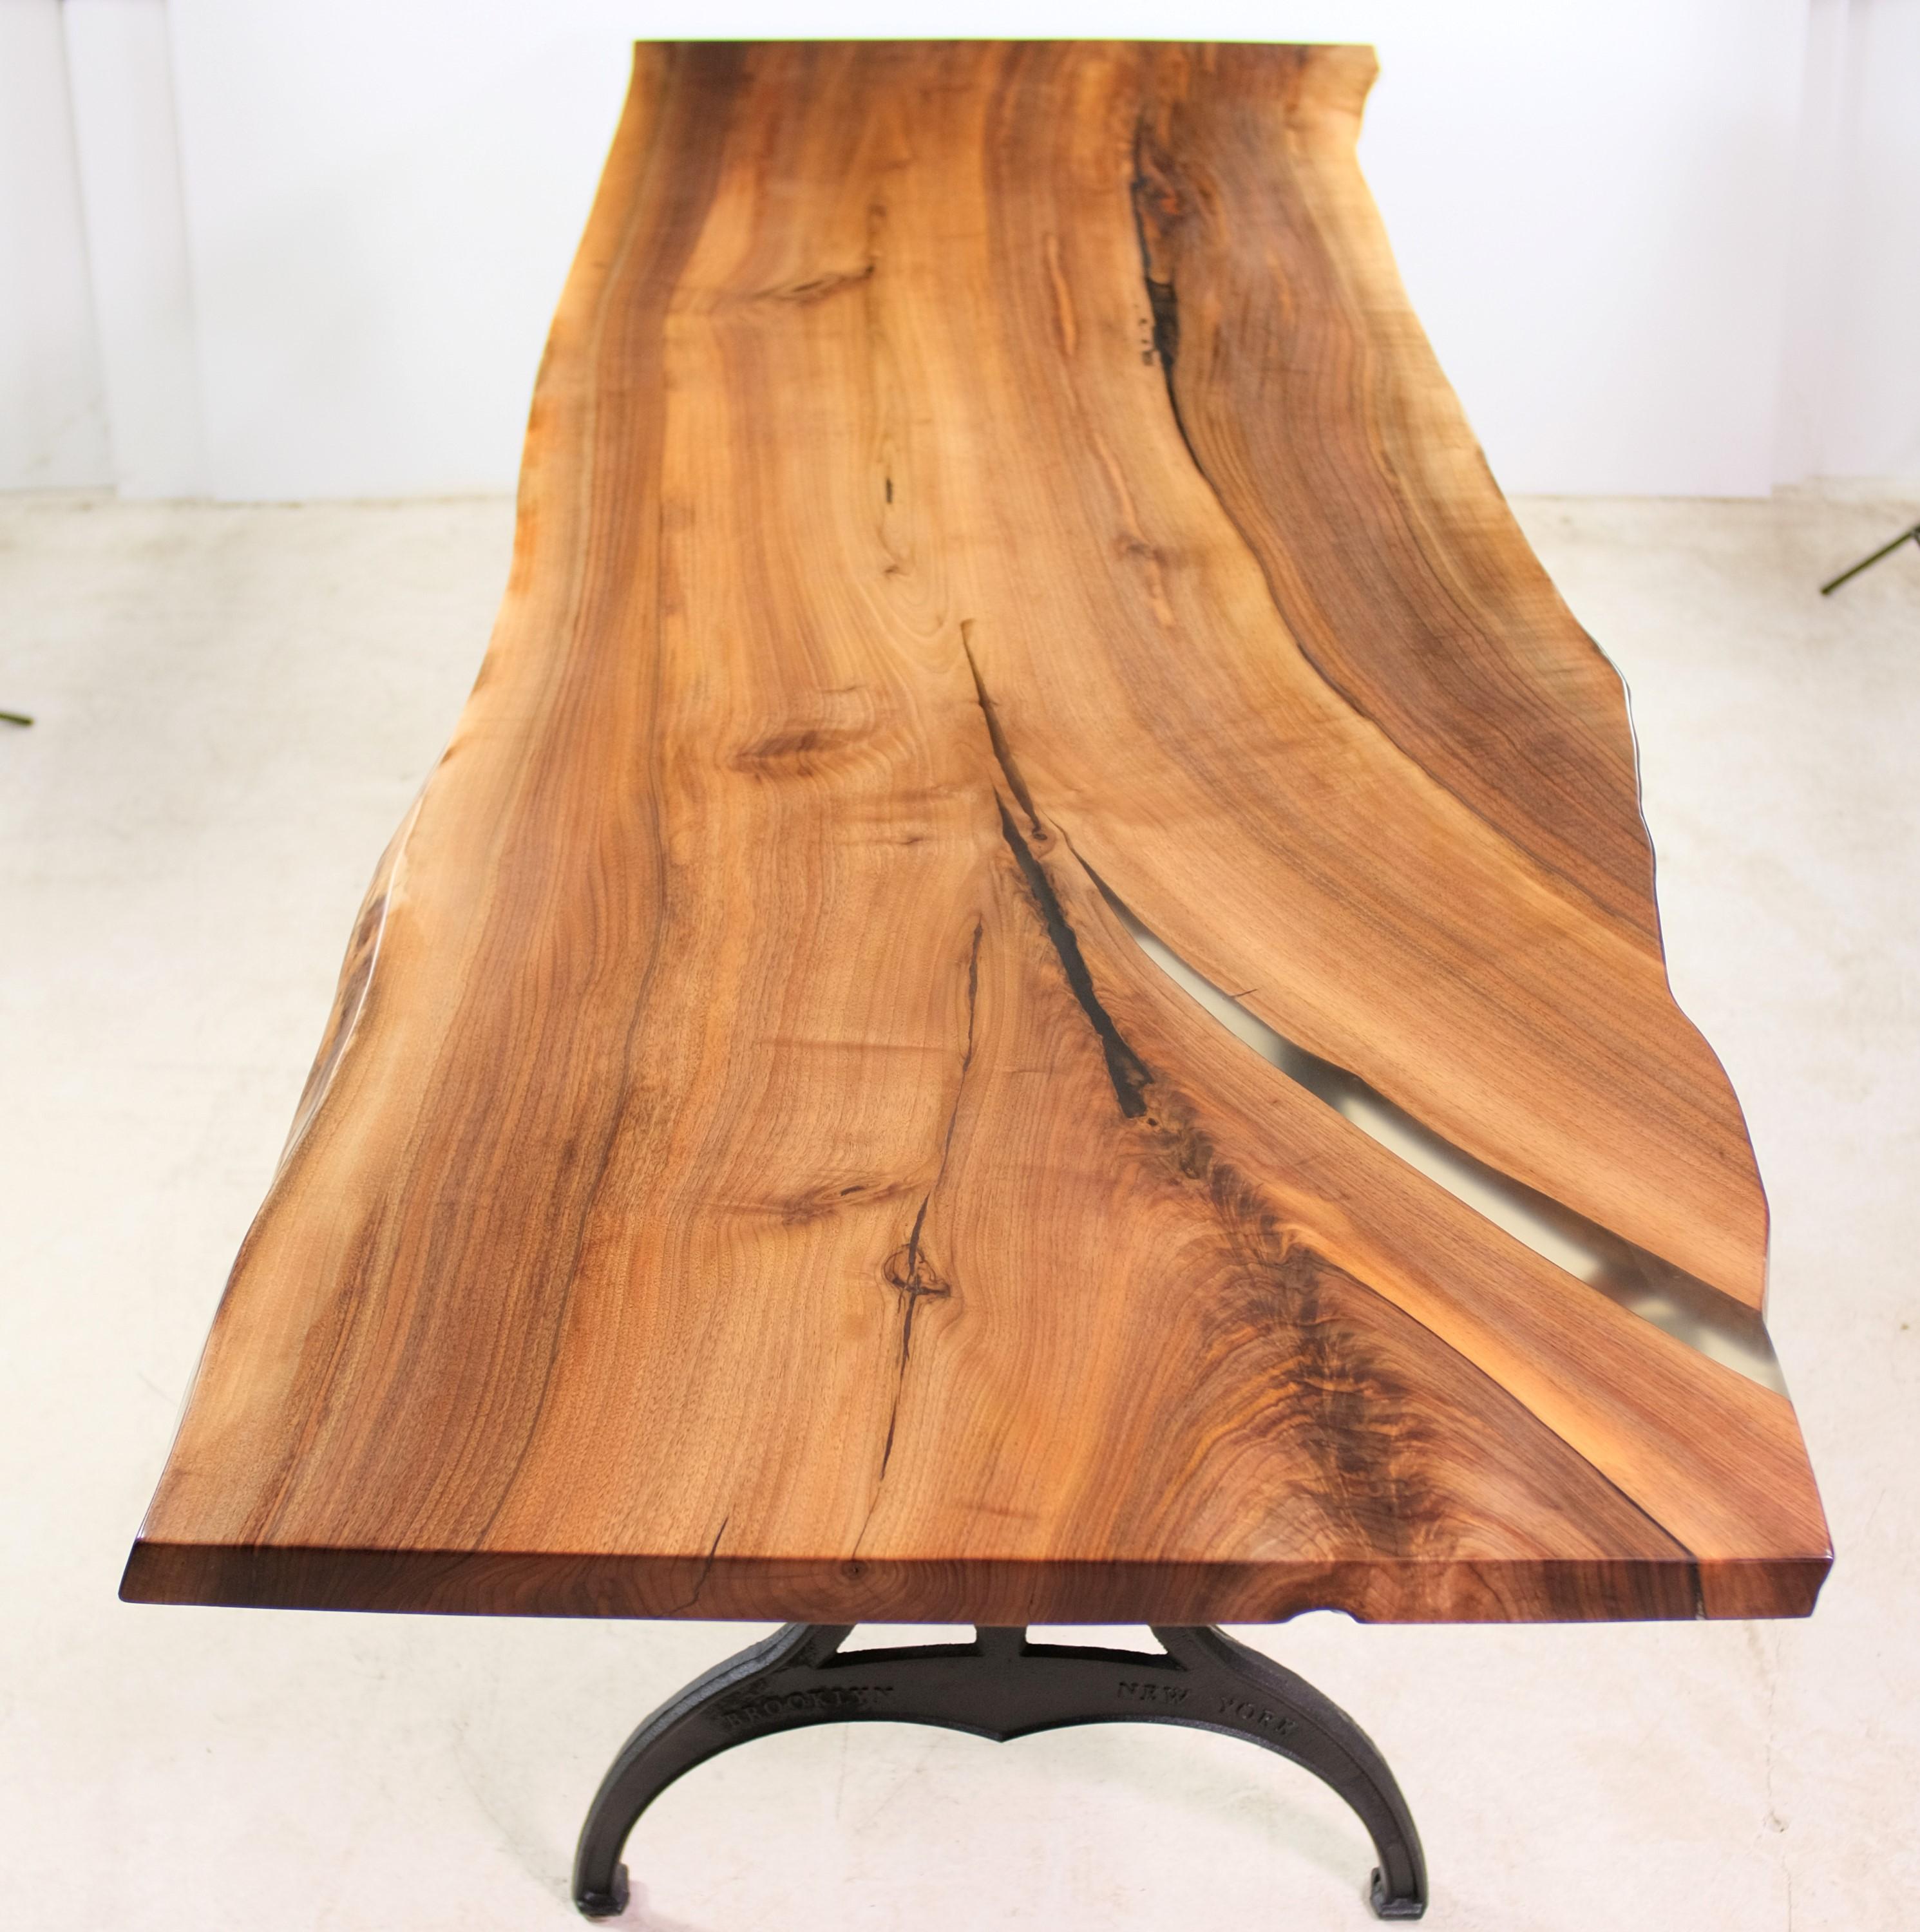 Made from a single slab, this live edge walnut table features a natural open accent filled with clear resin. Mated with industrial cast iron legs that say Brooklyn, New York in raised lettering. This can be seen at our 400 Gilligan St location in